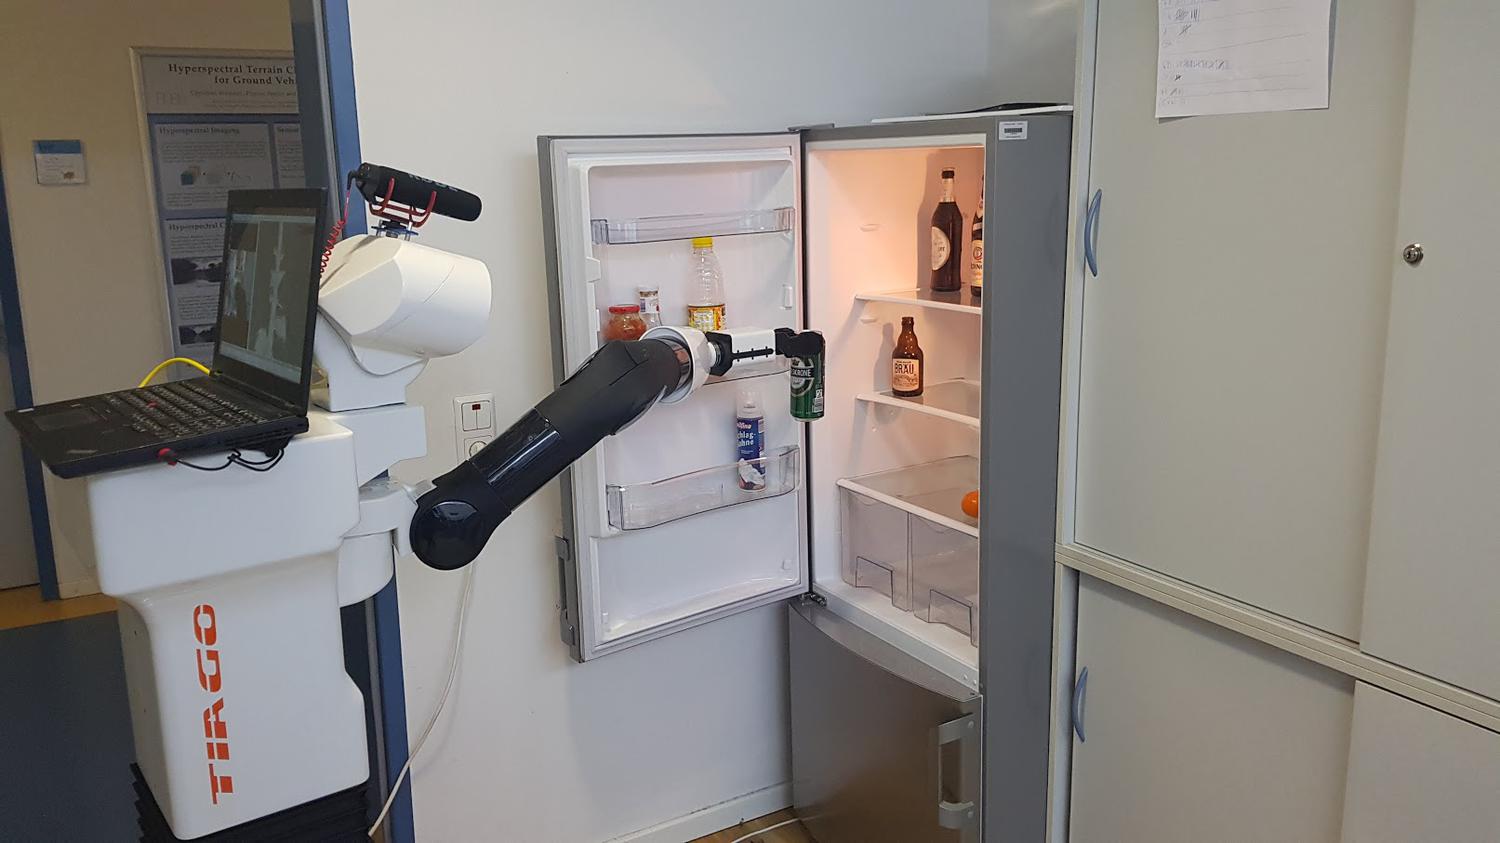 Robot, which brings beer from the refrigerator (video)